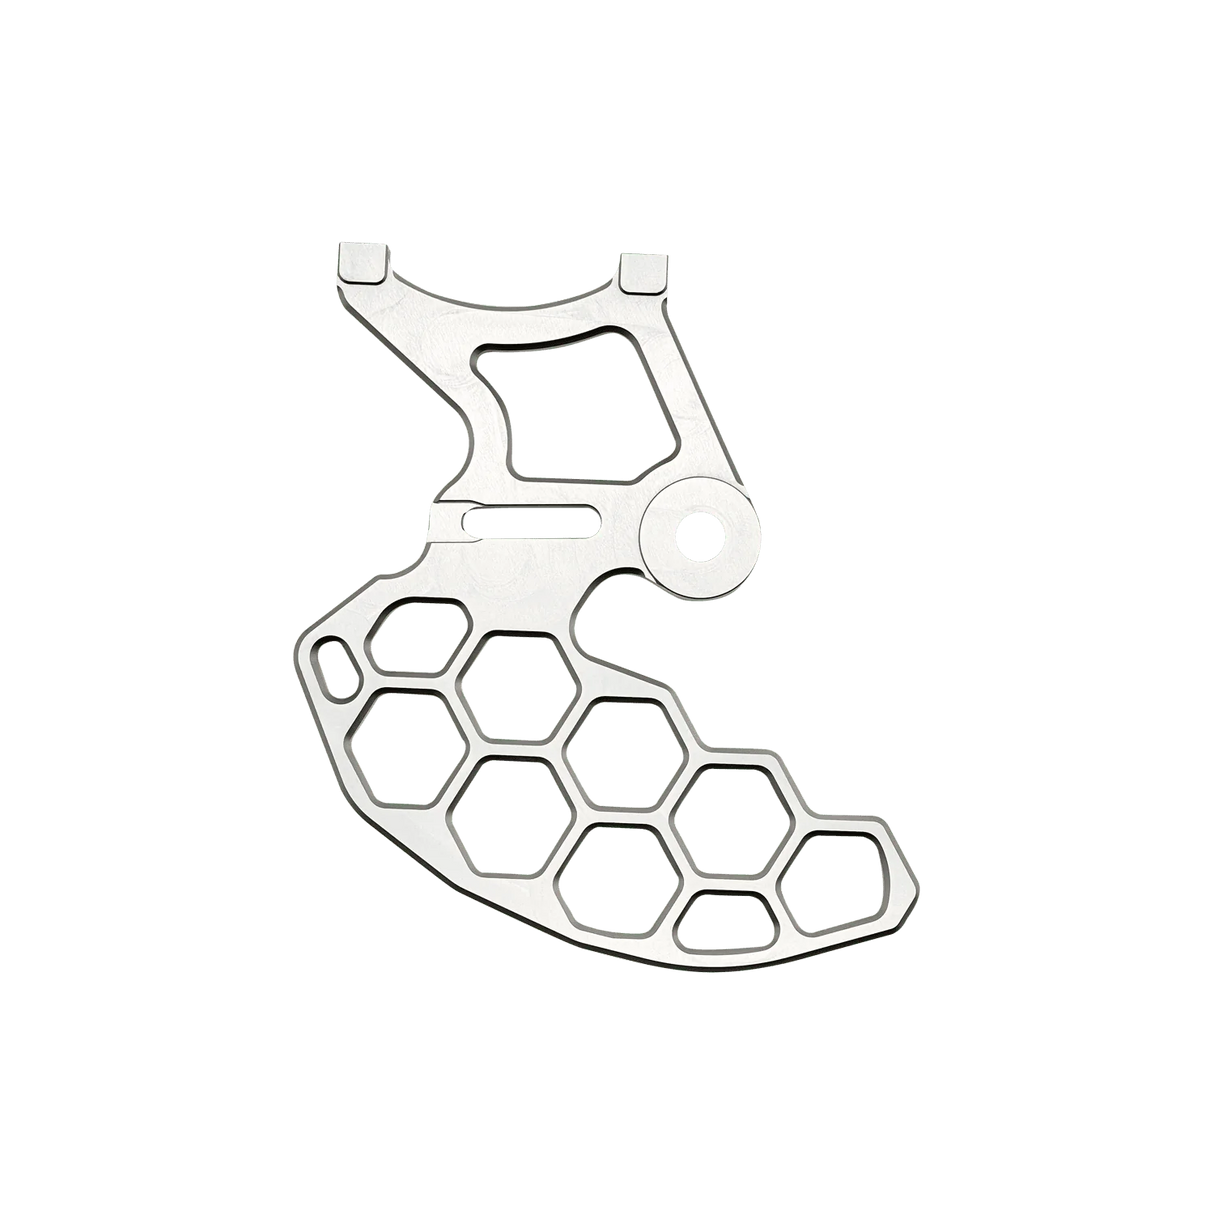 Two Wheels Empire Brake Disc Guard for Sur-Ron Light Bee